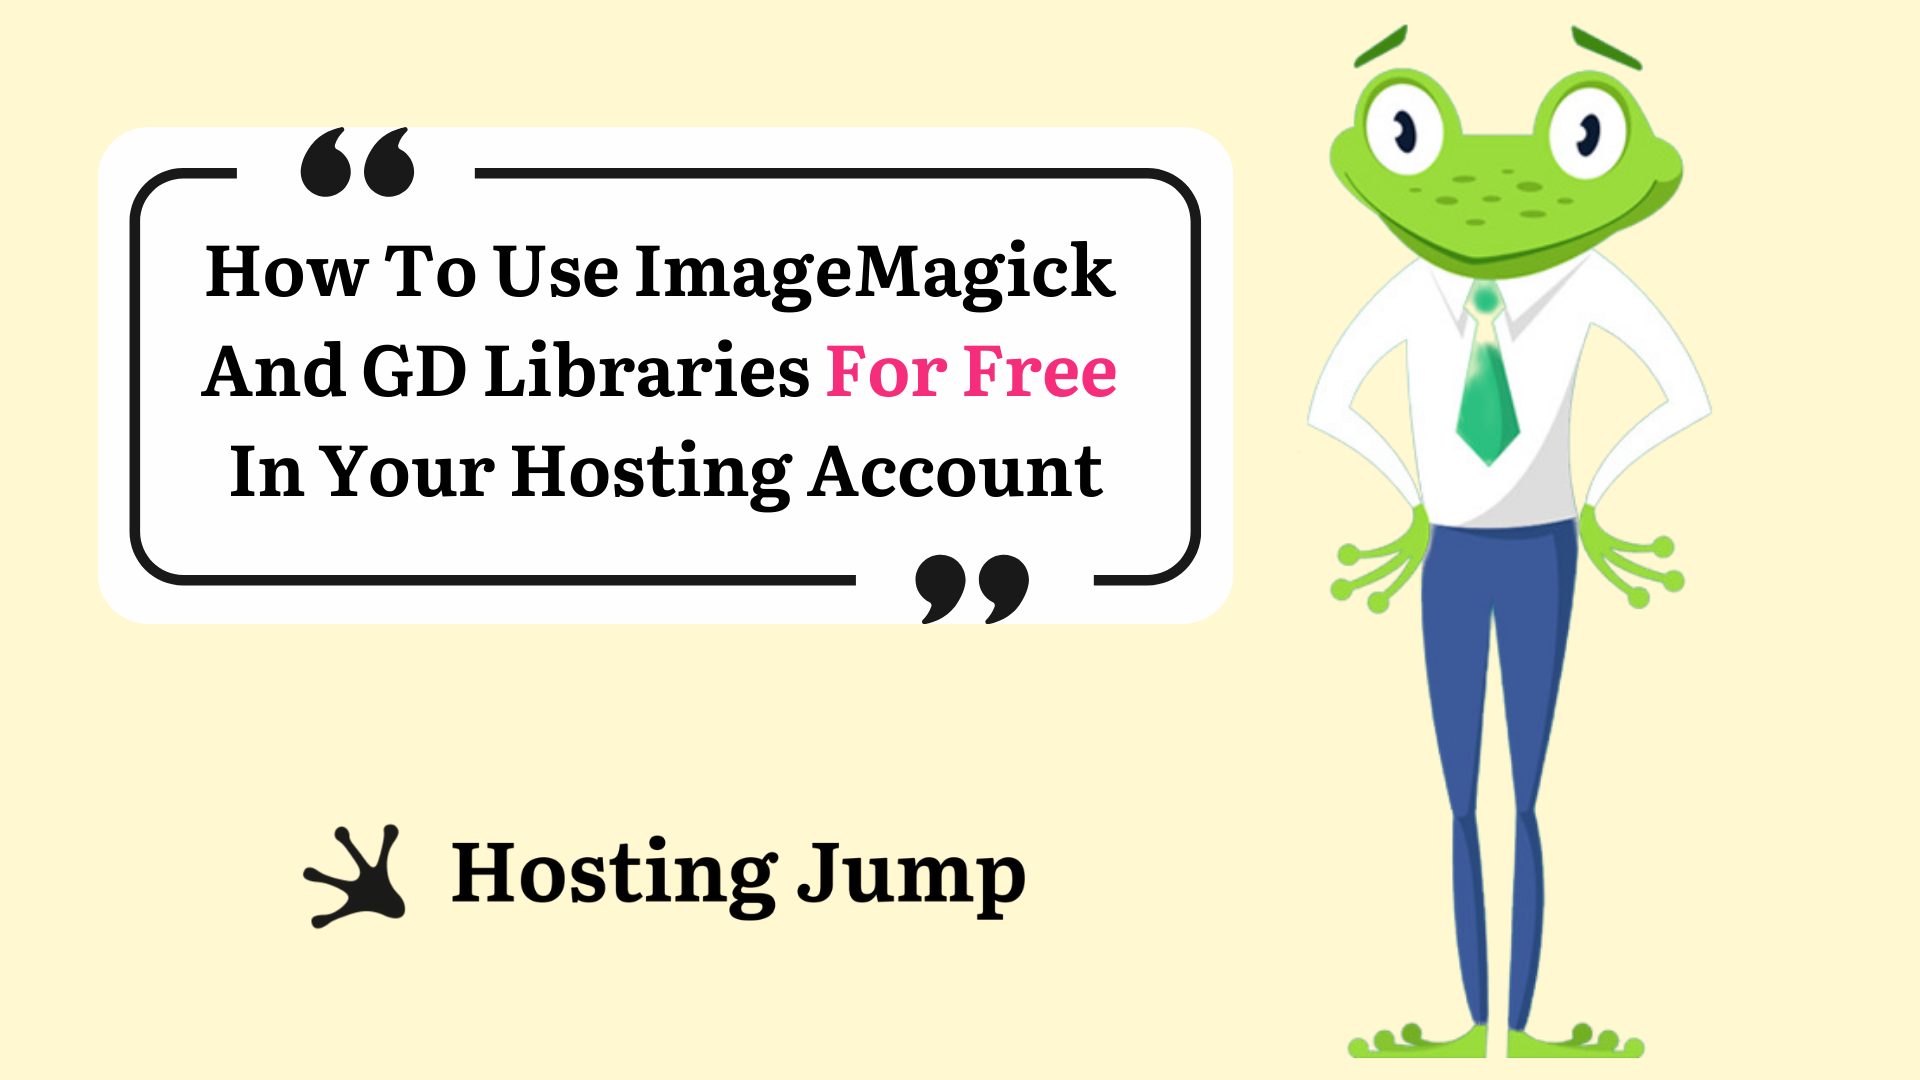 How To Use ImageMagick And GD Libraries For Free In Your Hosting Account